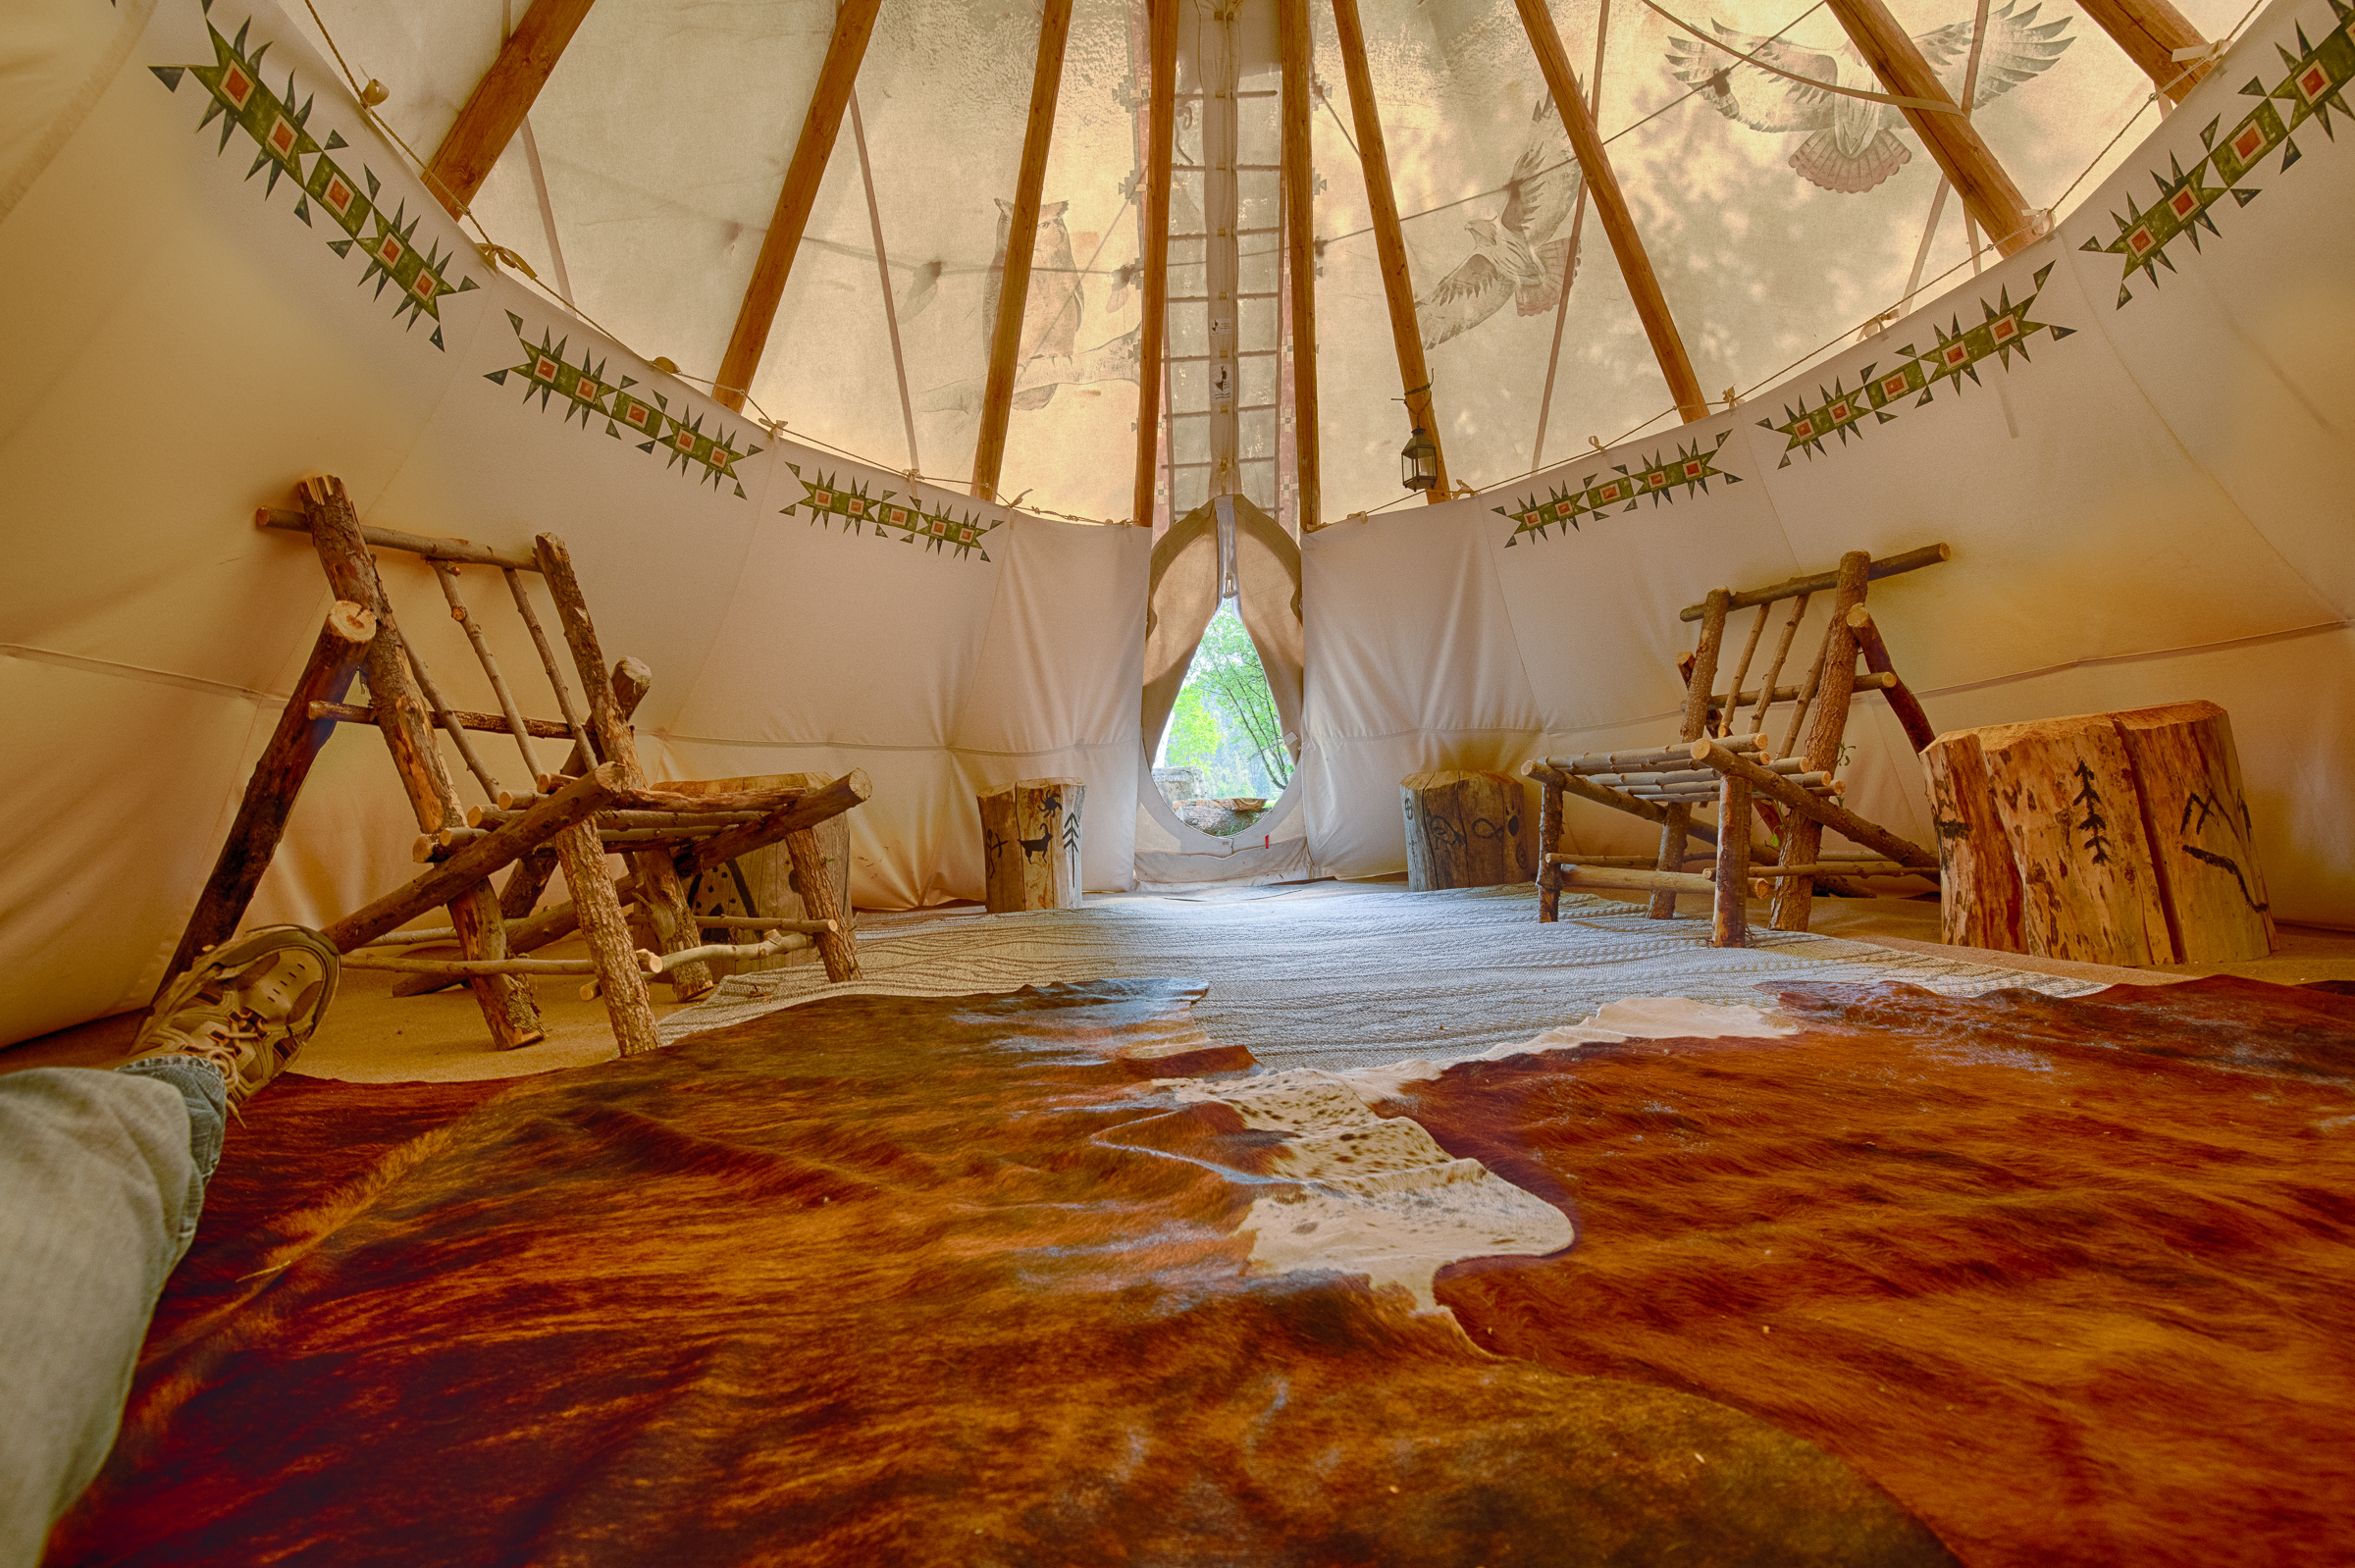 Interior of a camping tipi at Teepees by the River. Canvas teepee with Indian decorations.